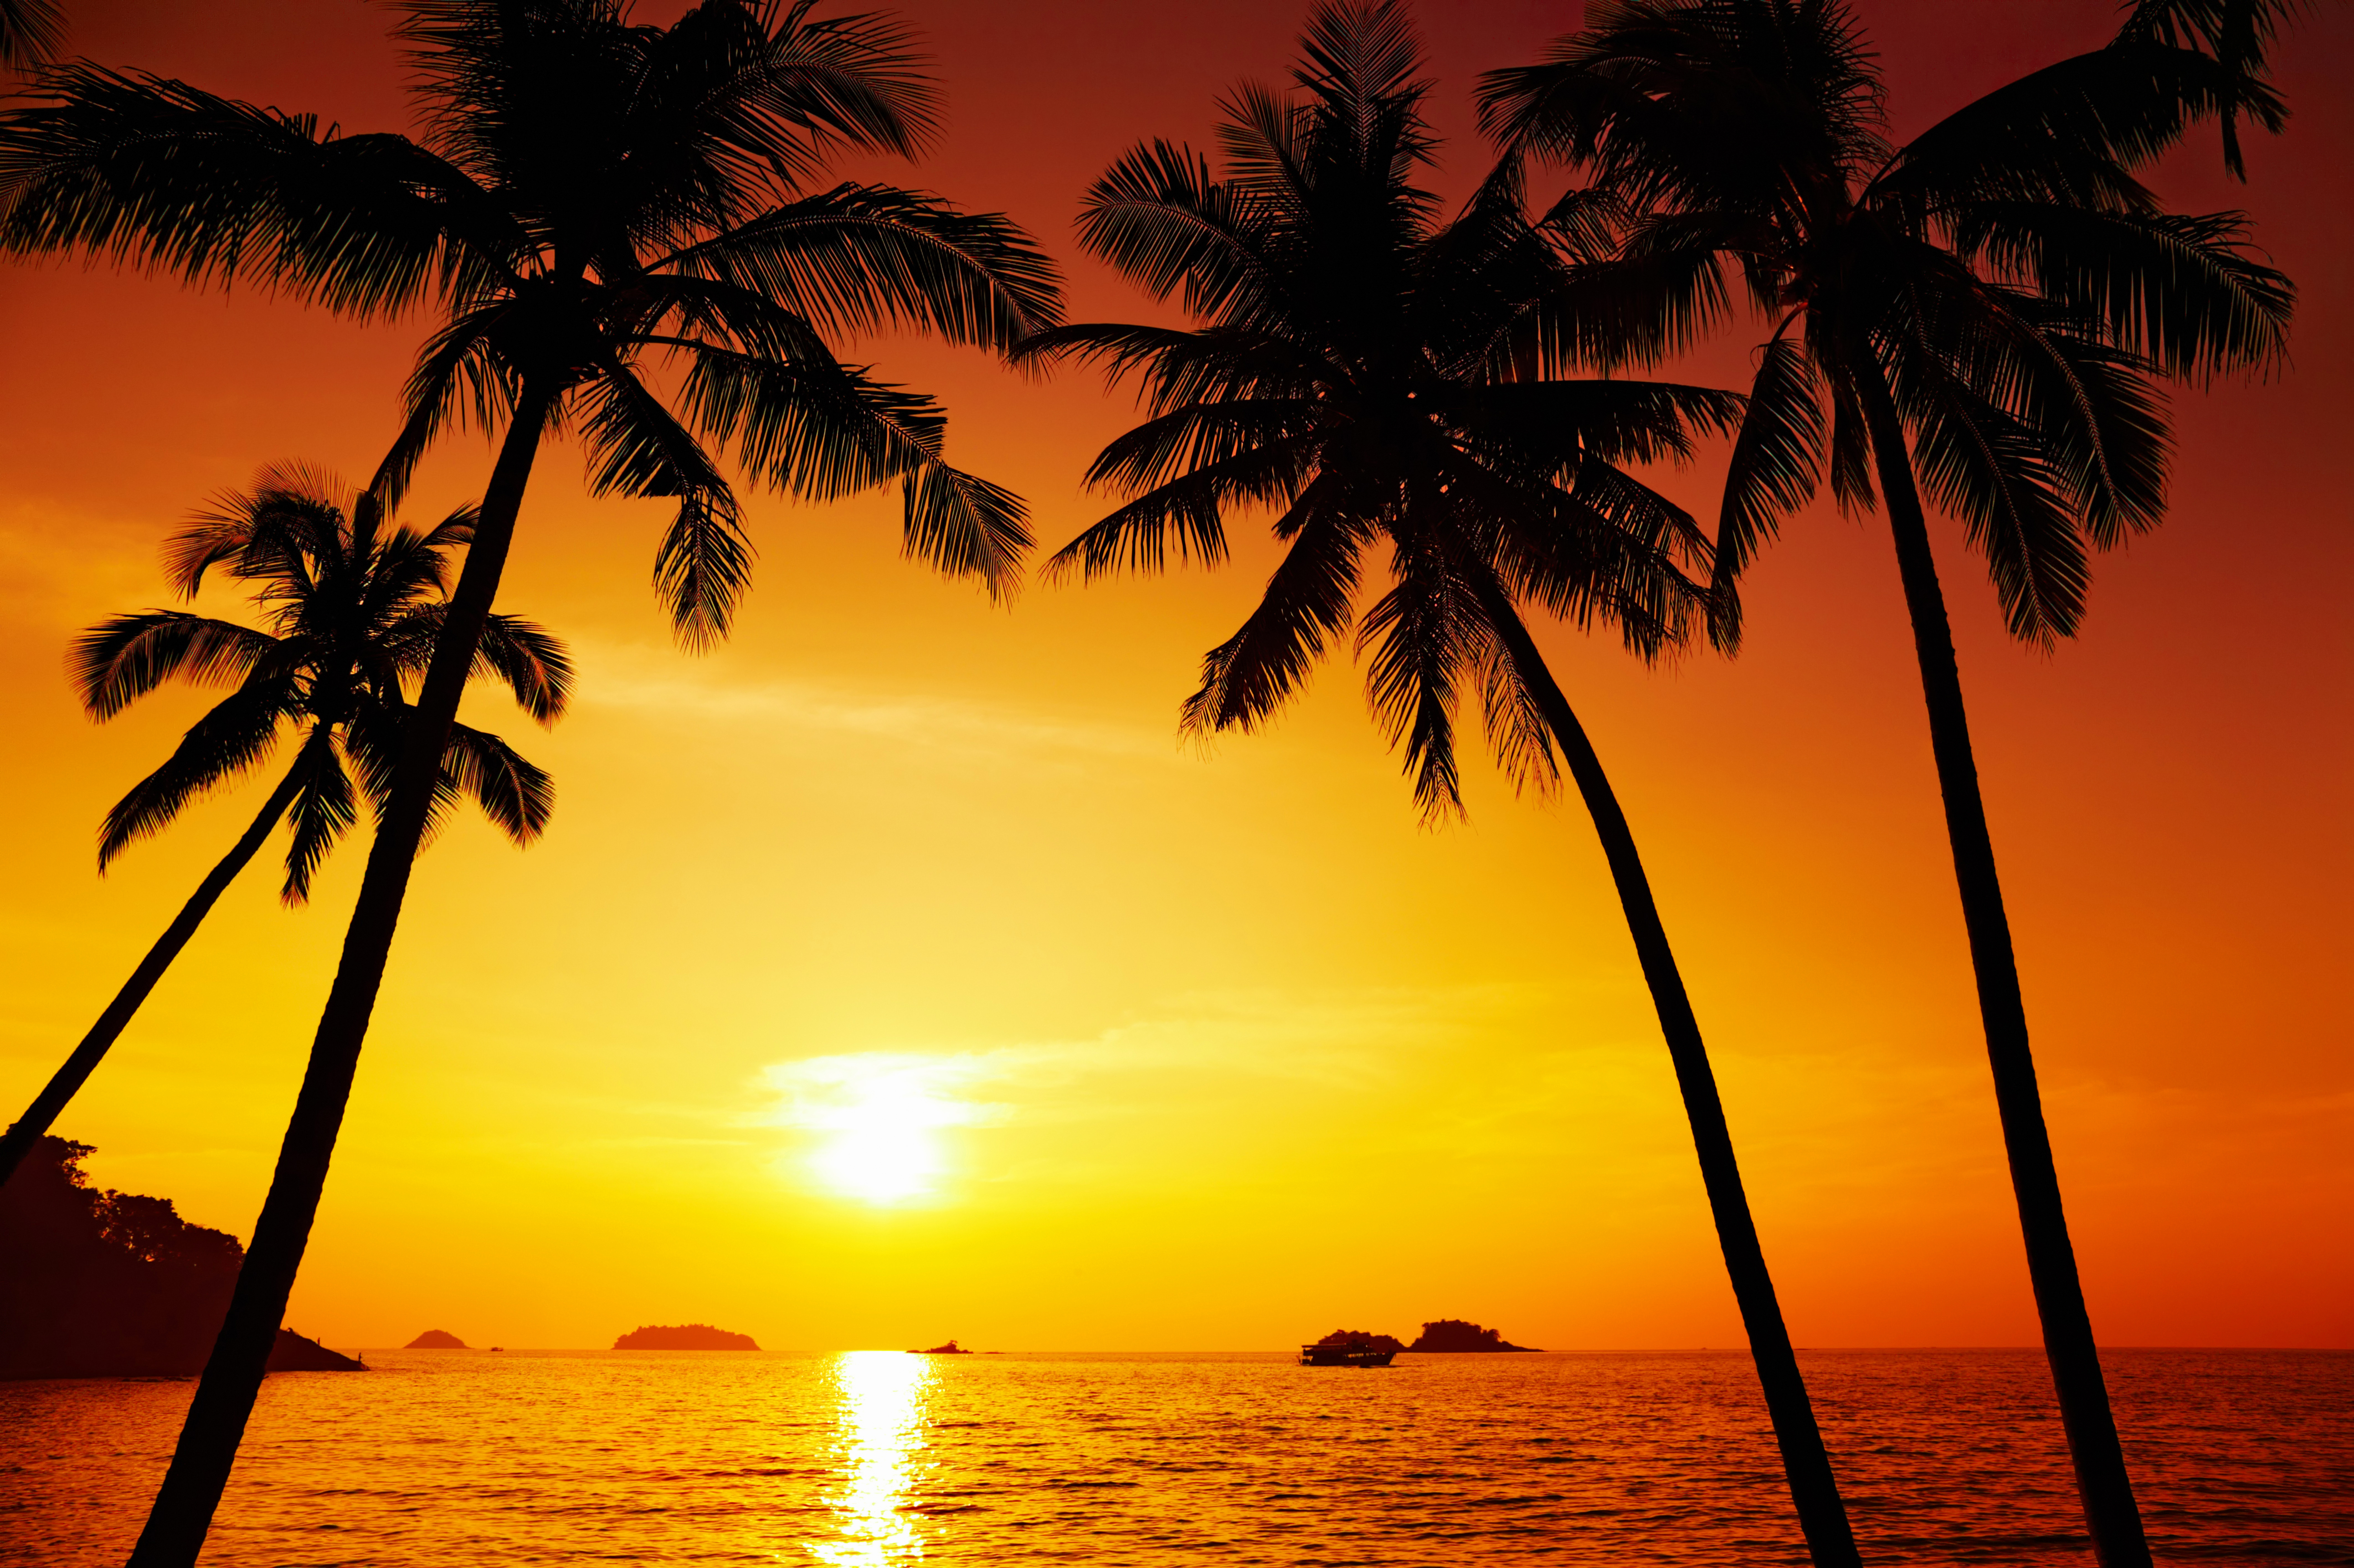 Beach Sunset Background Gallery Yopriceville   High Quality